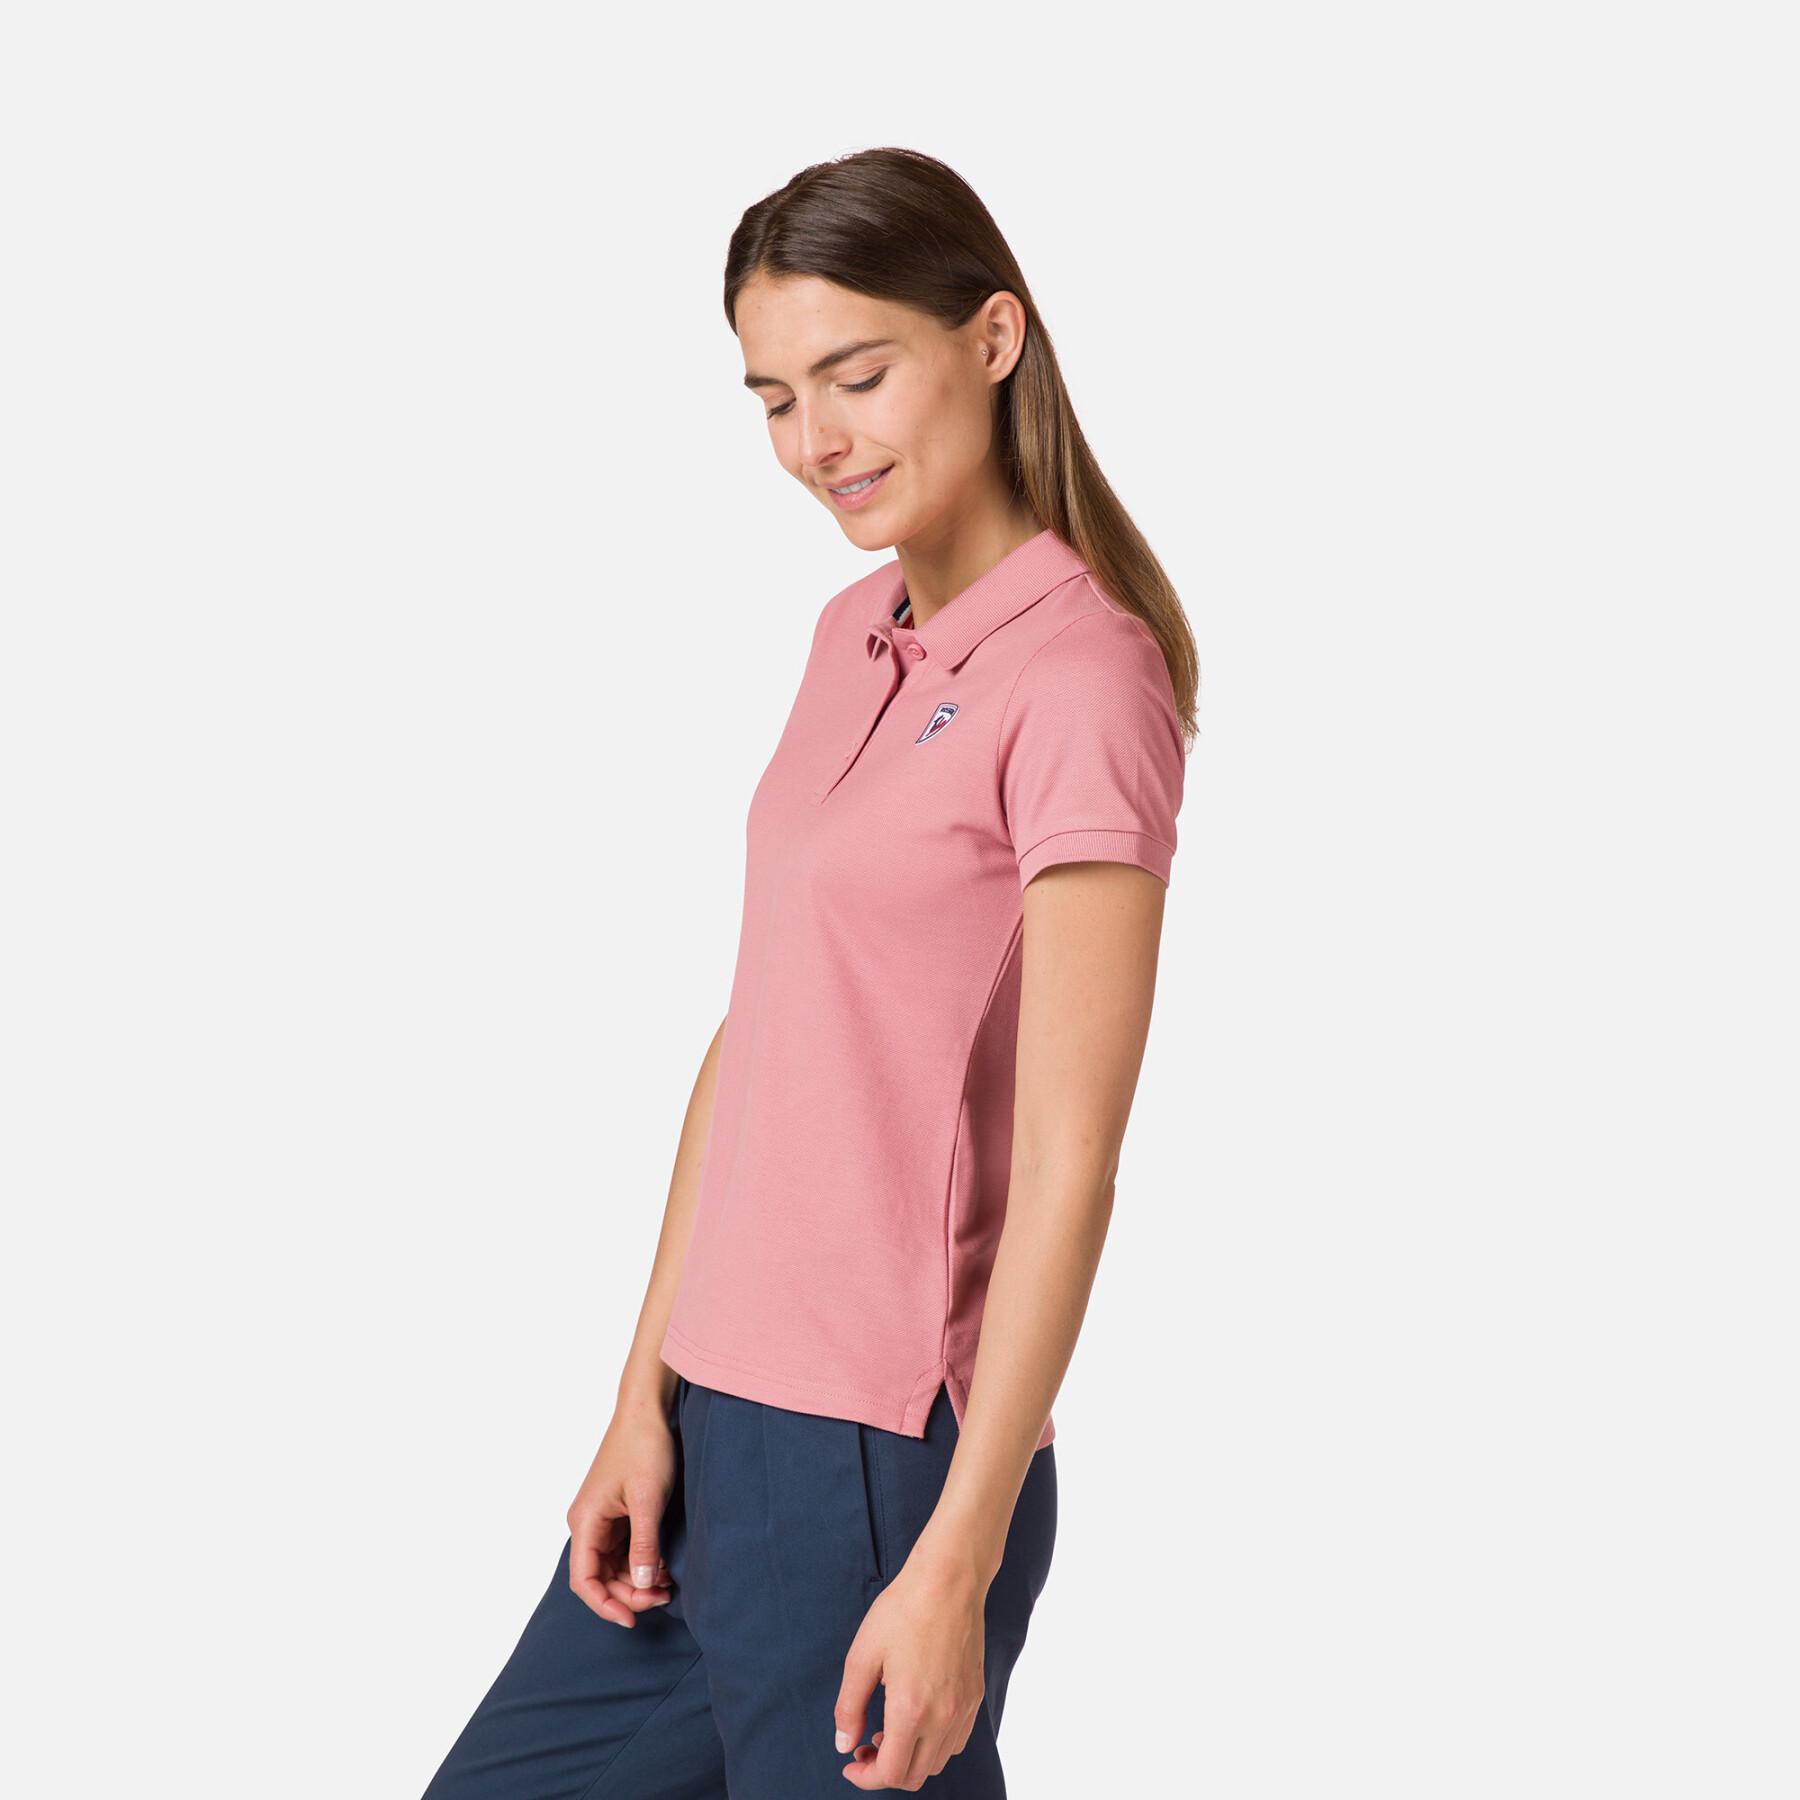 Polo shirt with woman logo Rossignol